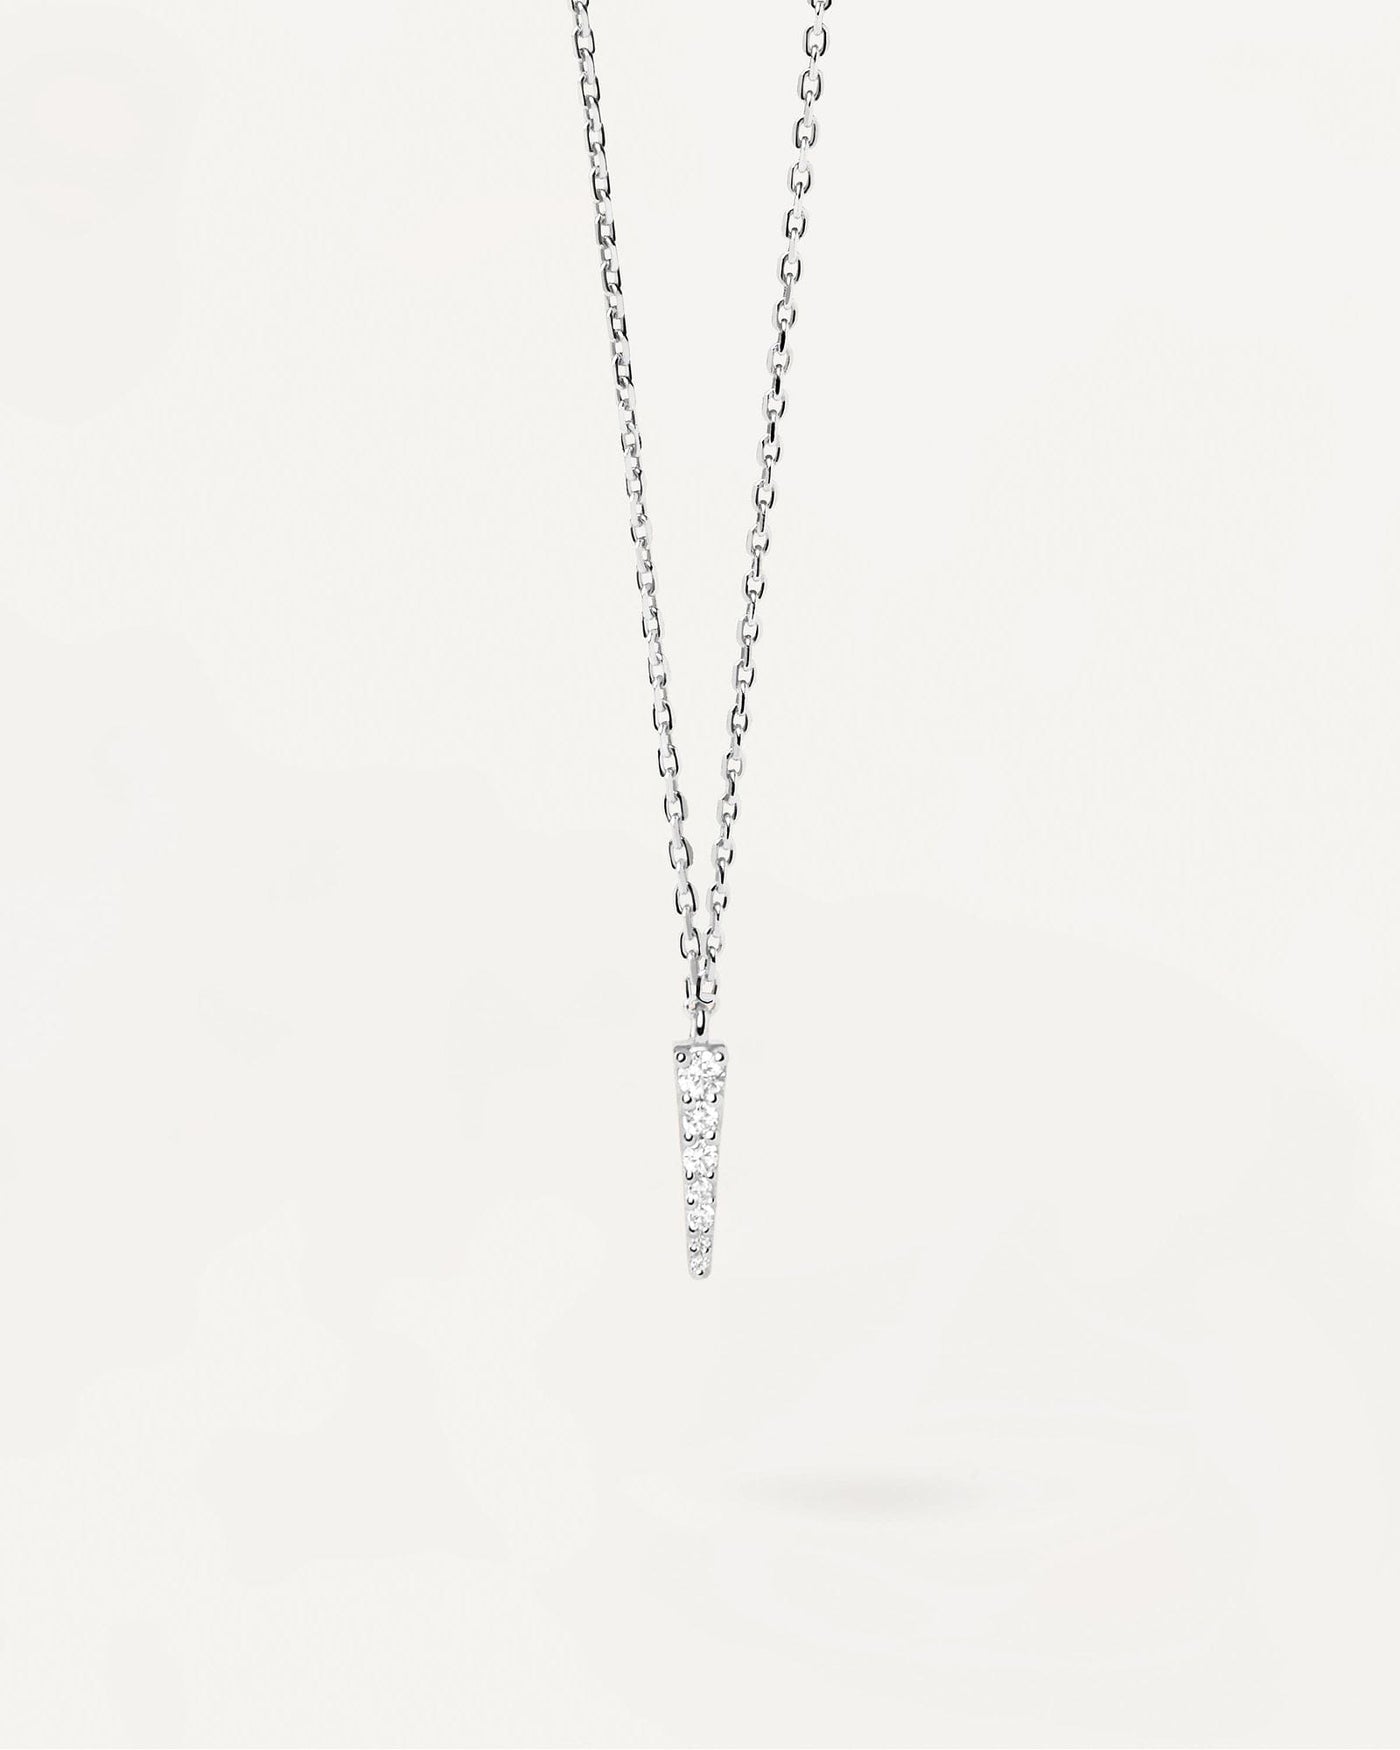 2024 Selection | Peak Silver Necklace. Sterling silver necklace with white zirconia pendant in tip shape. Get the latest arrival from PDPAOLA. Place your order safely and get this Best Seller. Free Shipping.